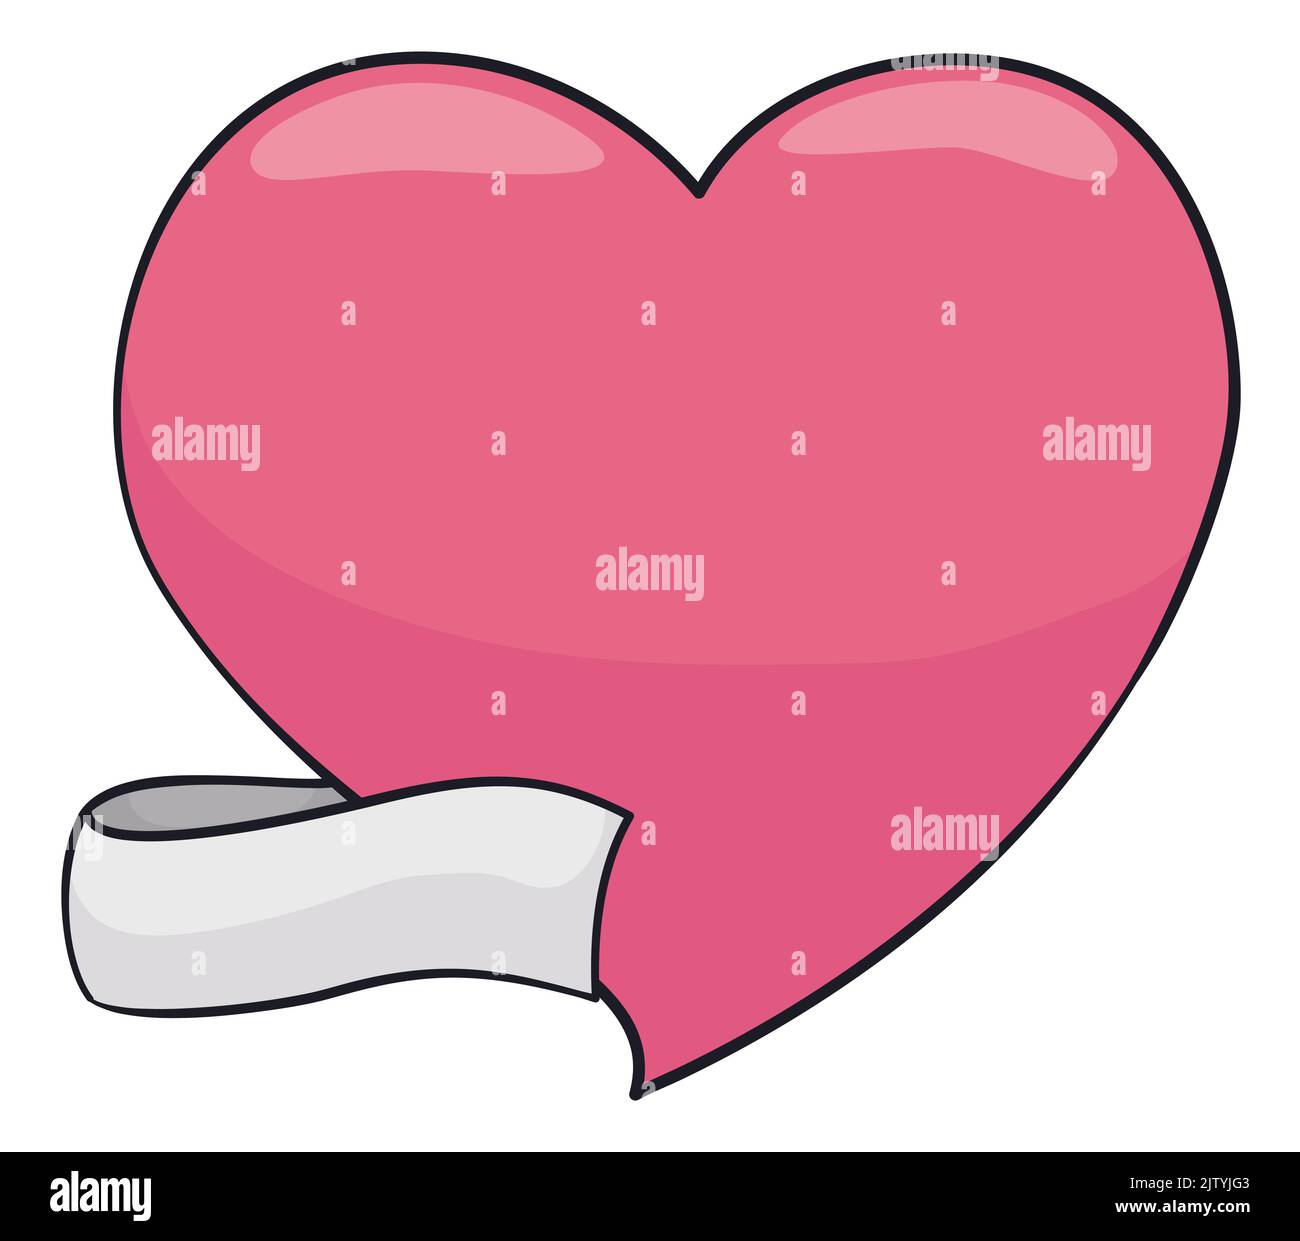 Giant heart shape of pink color, wrapped with white empty ribbon, isolated over white background. Stock Vector